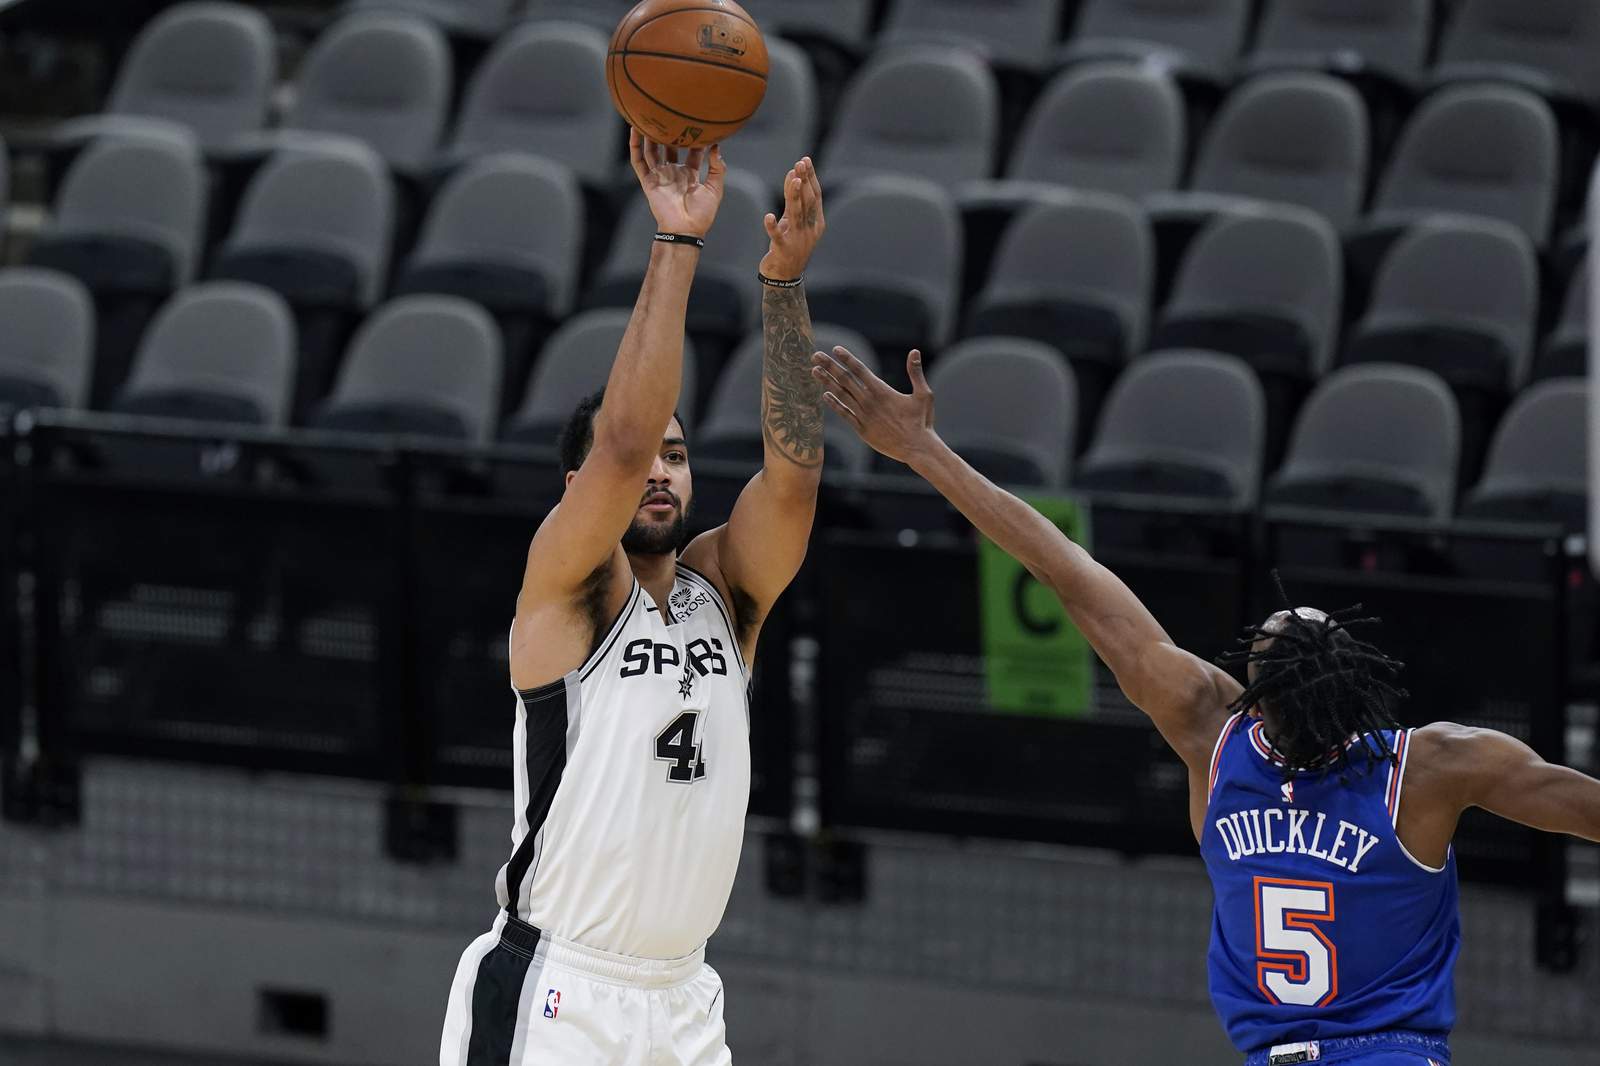 Lyles, Murray lead Spurs to victory, snapping Knicks’ streak